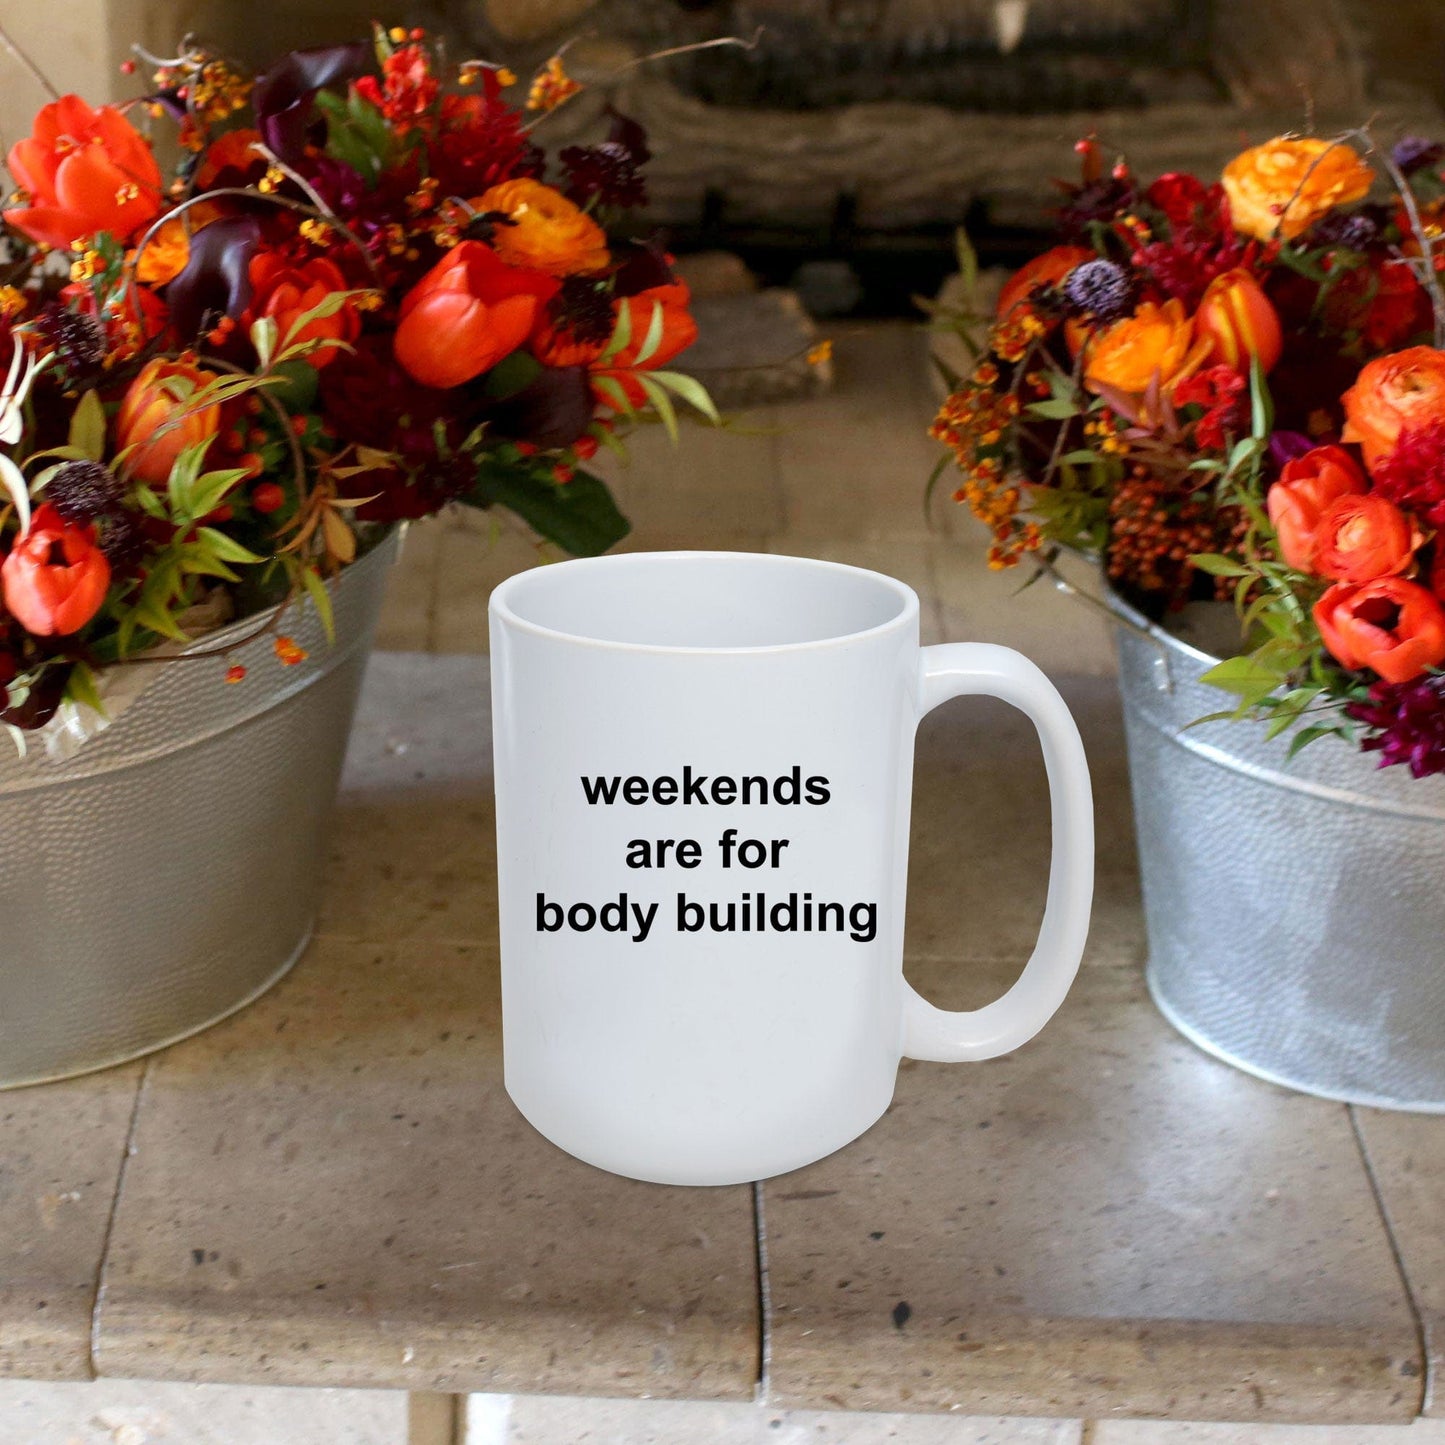 Body Builder Gift - Weekends are for body building funny coffee mug